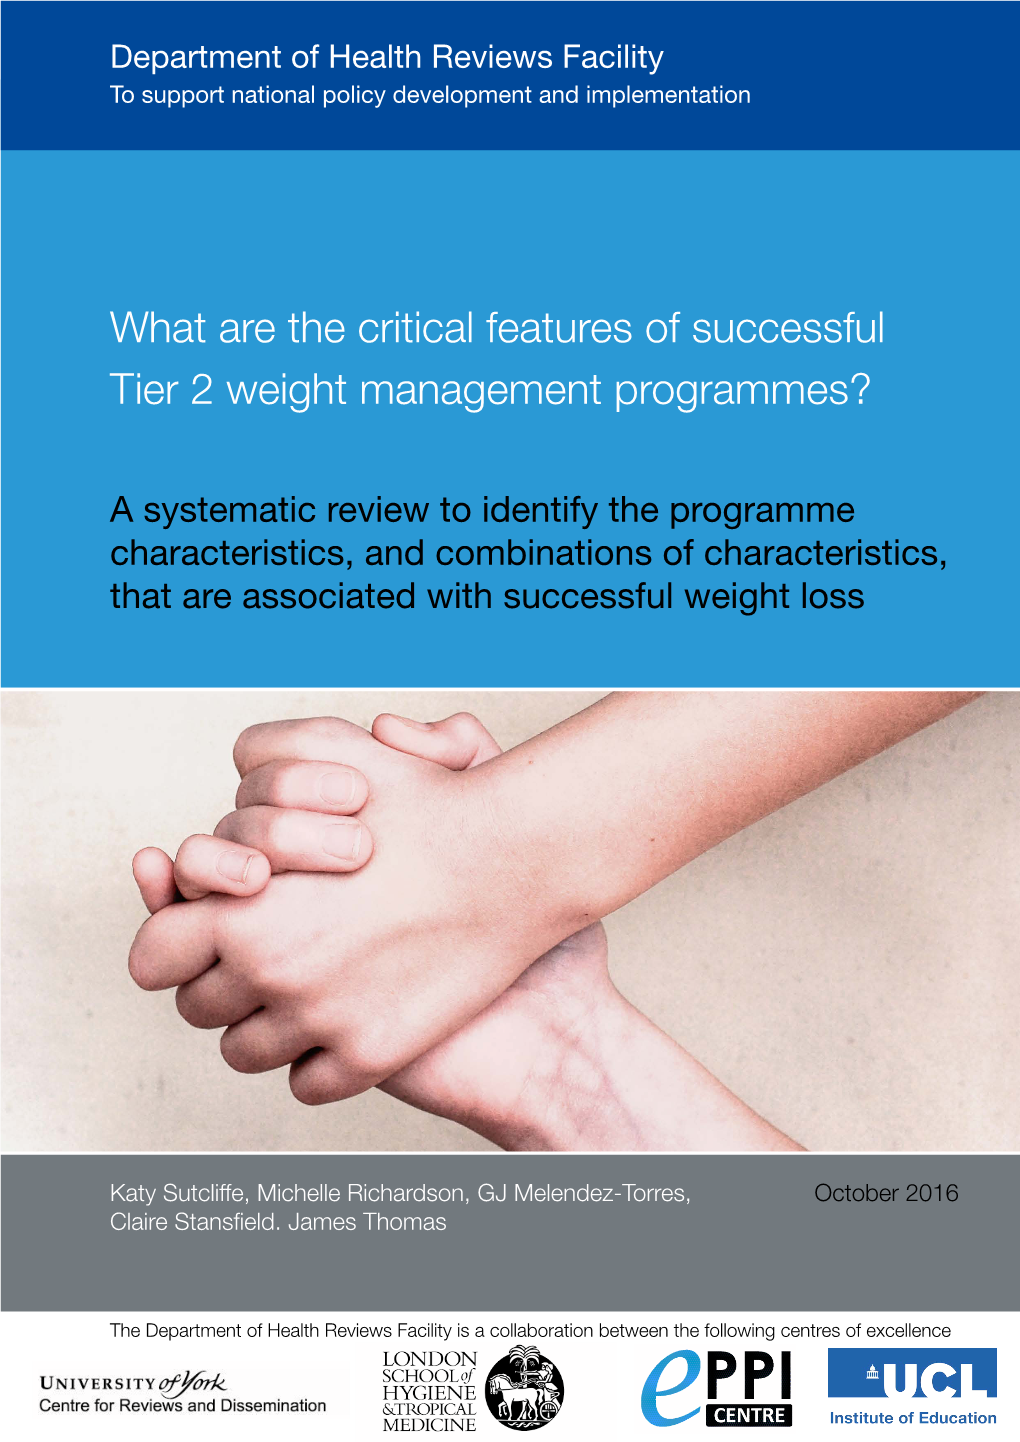 What Are the Critical Features of Successful Tier 2 Weight Management Programmes?